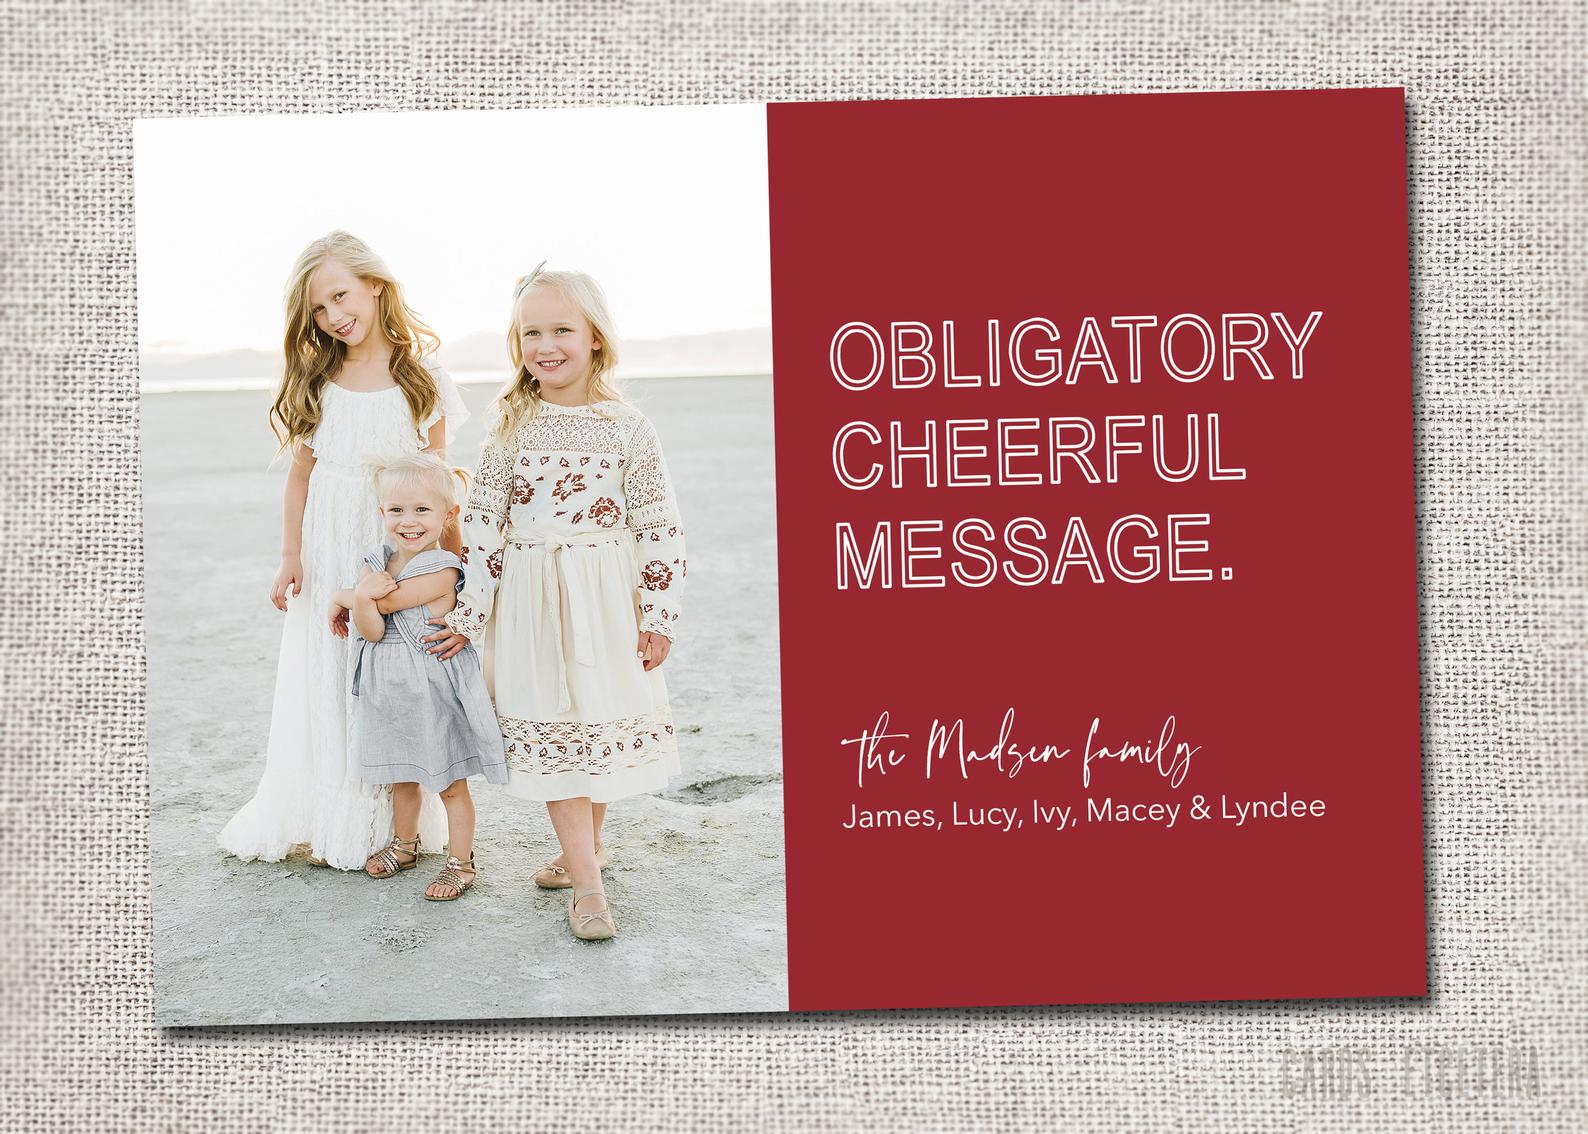 Funny Christmas cards for 2020: Obligatory Christmas photo card | Cards Etcetera